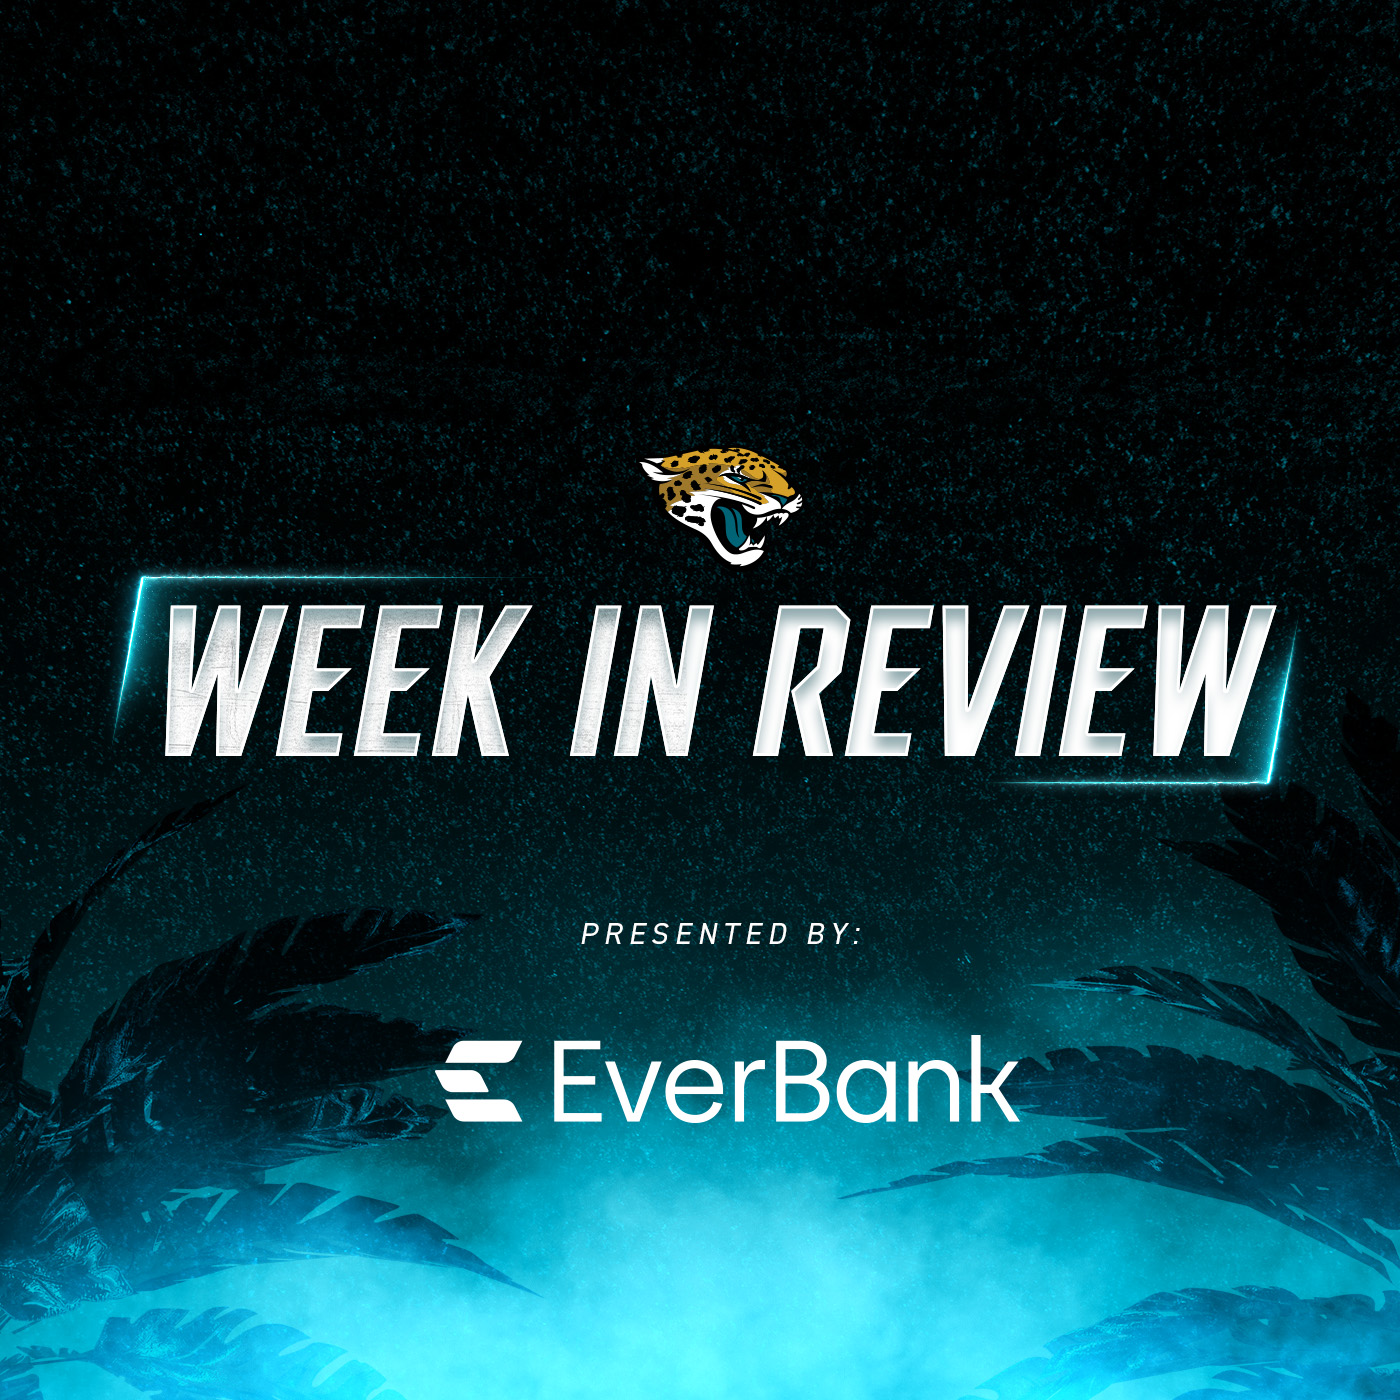 All Eyes Lie on Goals Ahead for the Jagaurs | Week in Review: January 5